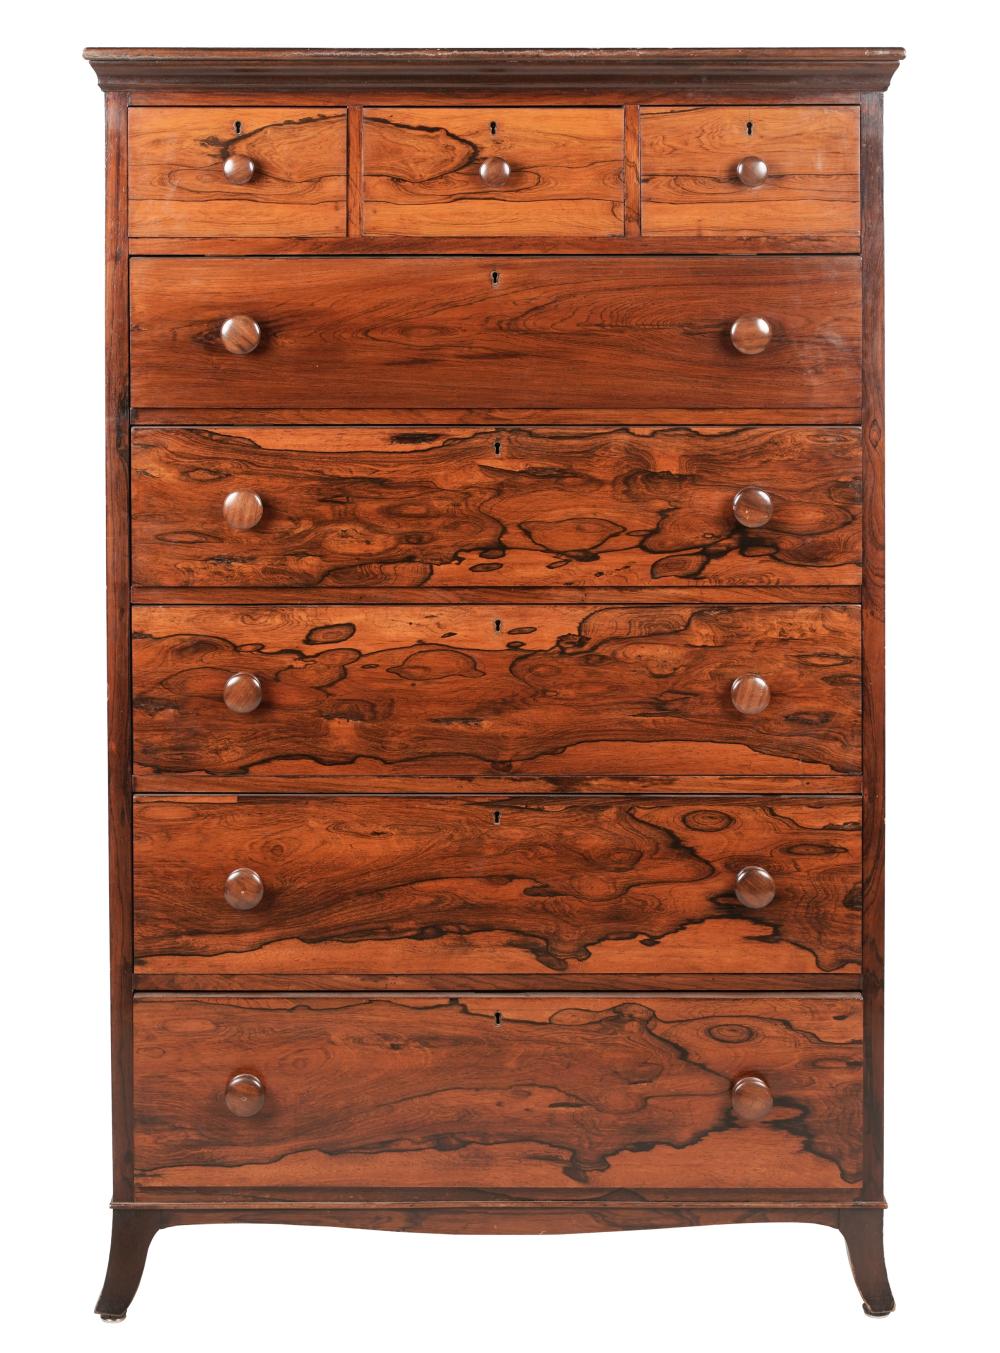 ROSEWOOD TALL CHEST OF DRAWERSlate 301e88